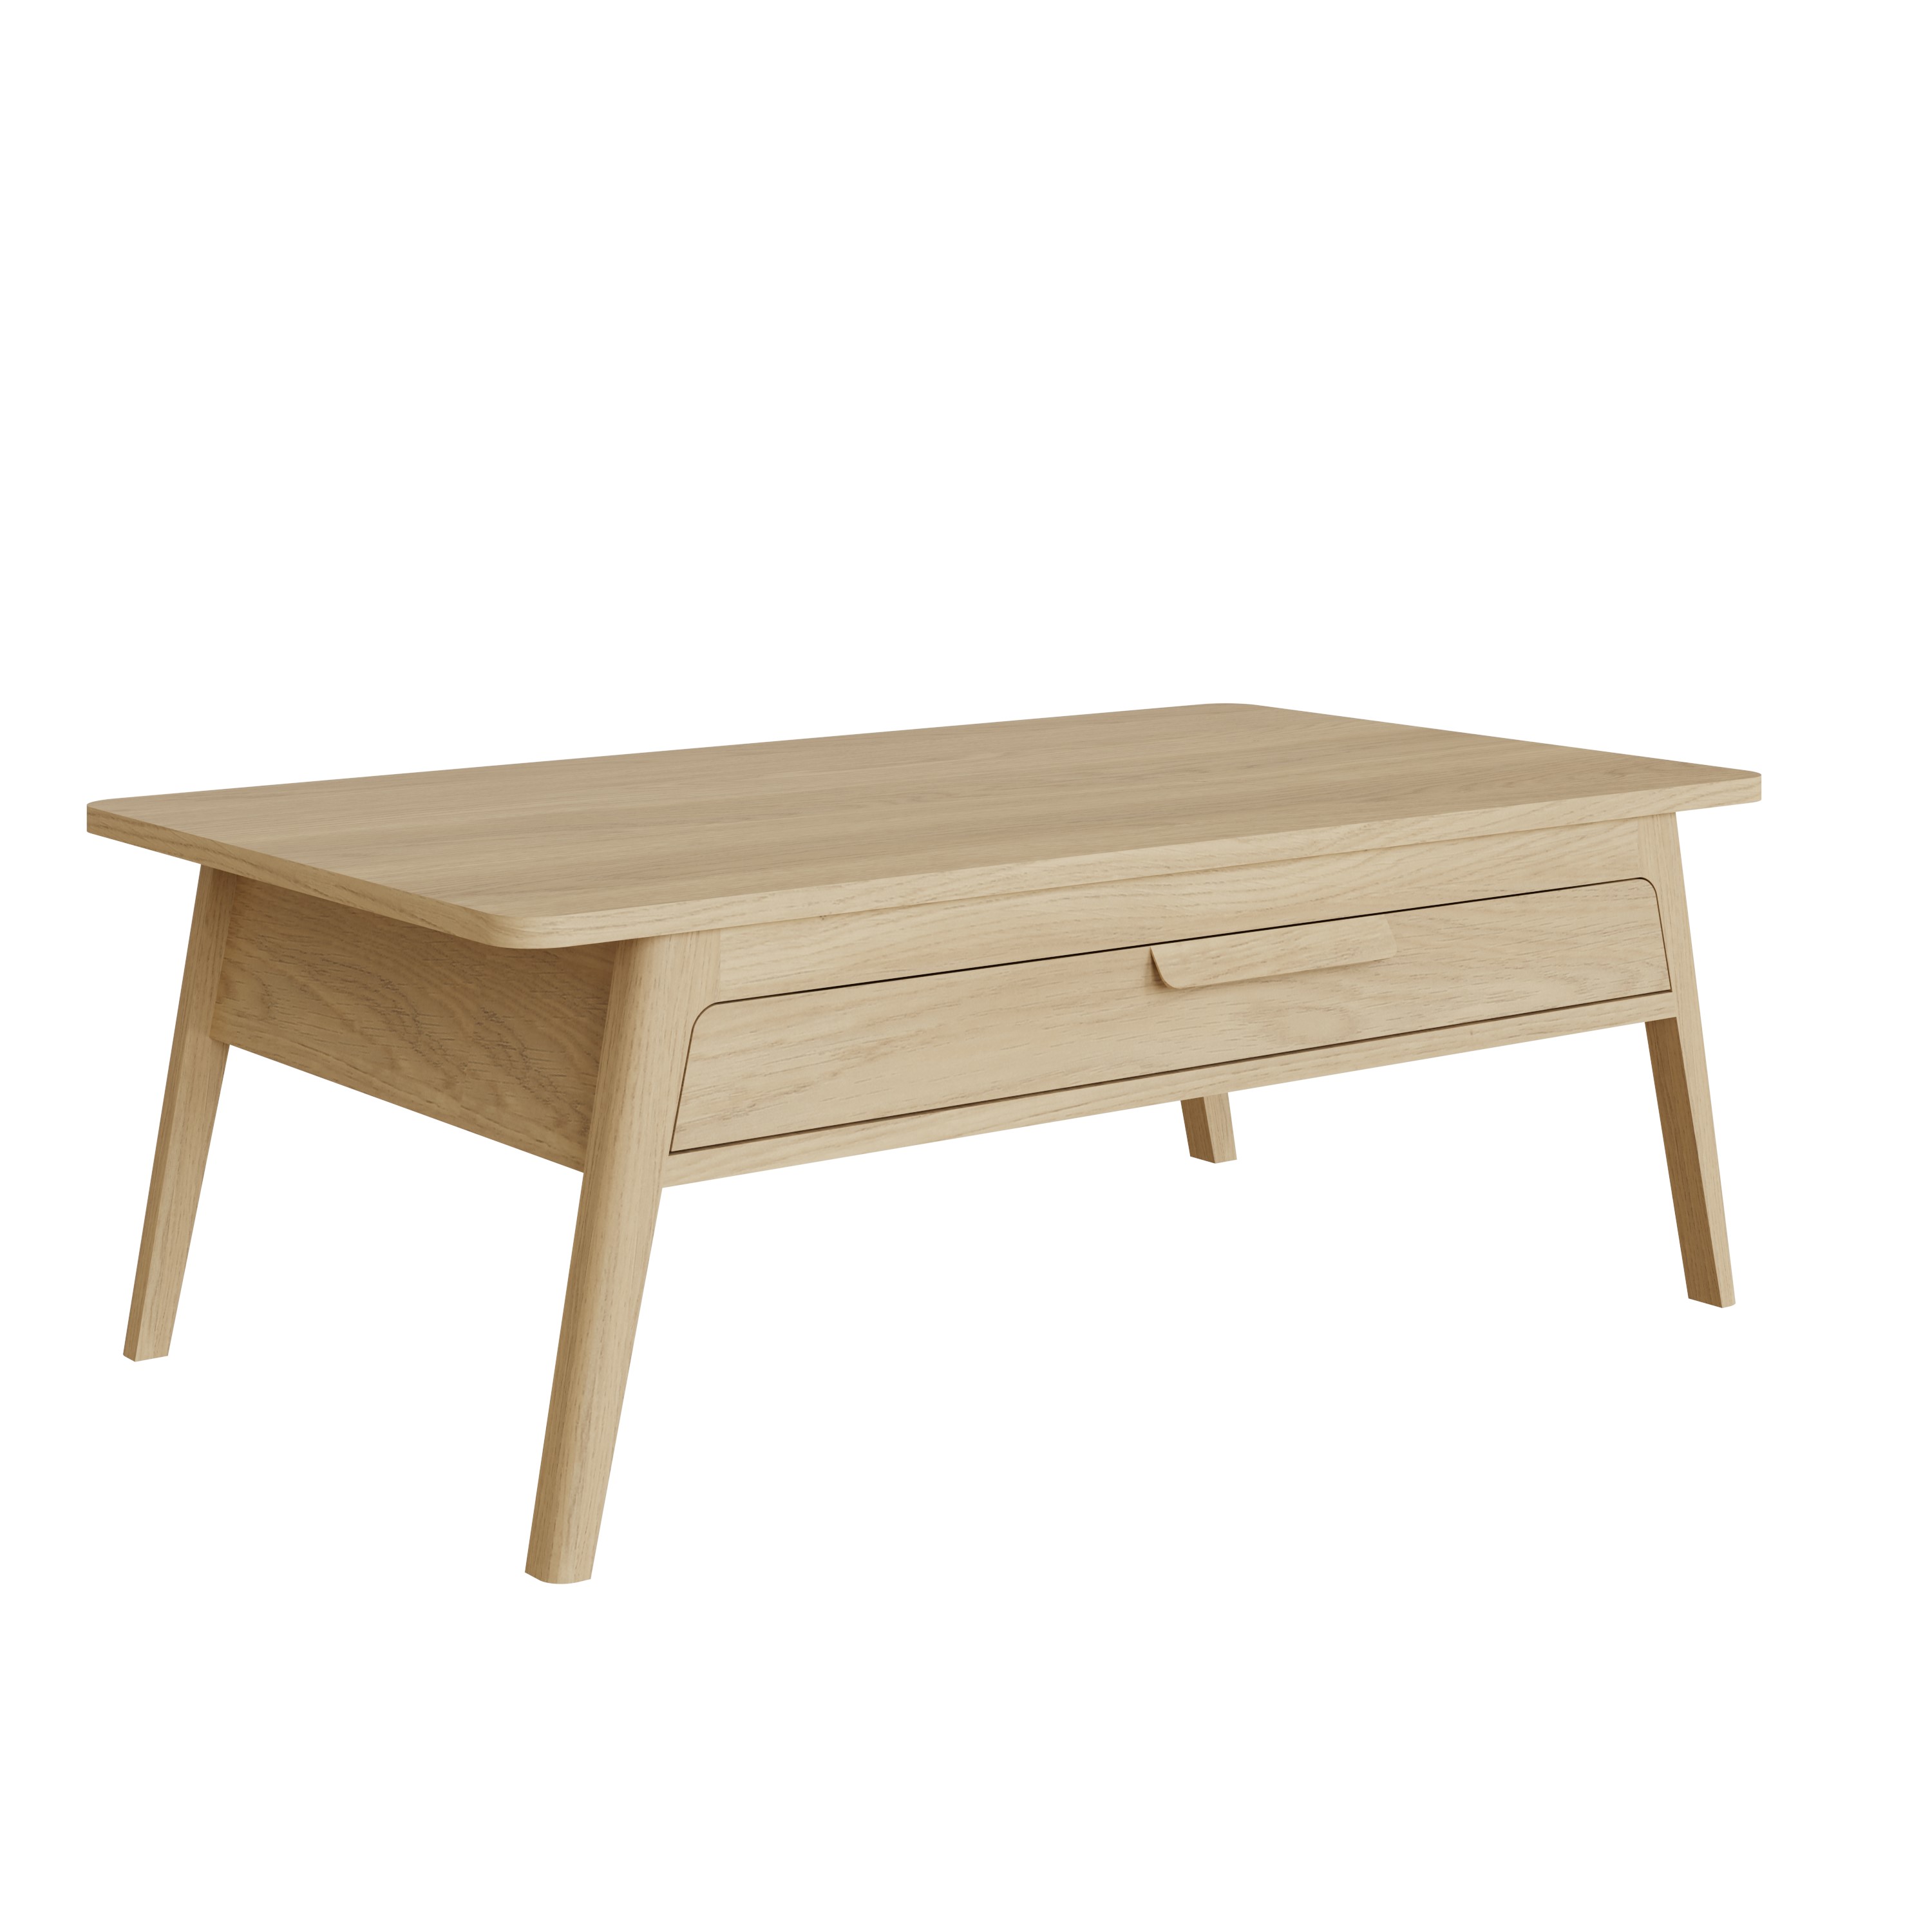 Magnussen Coffee Table